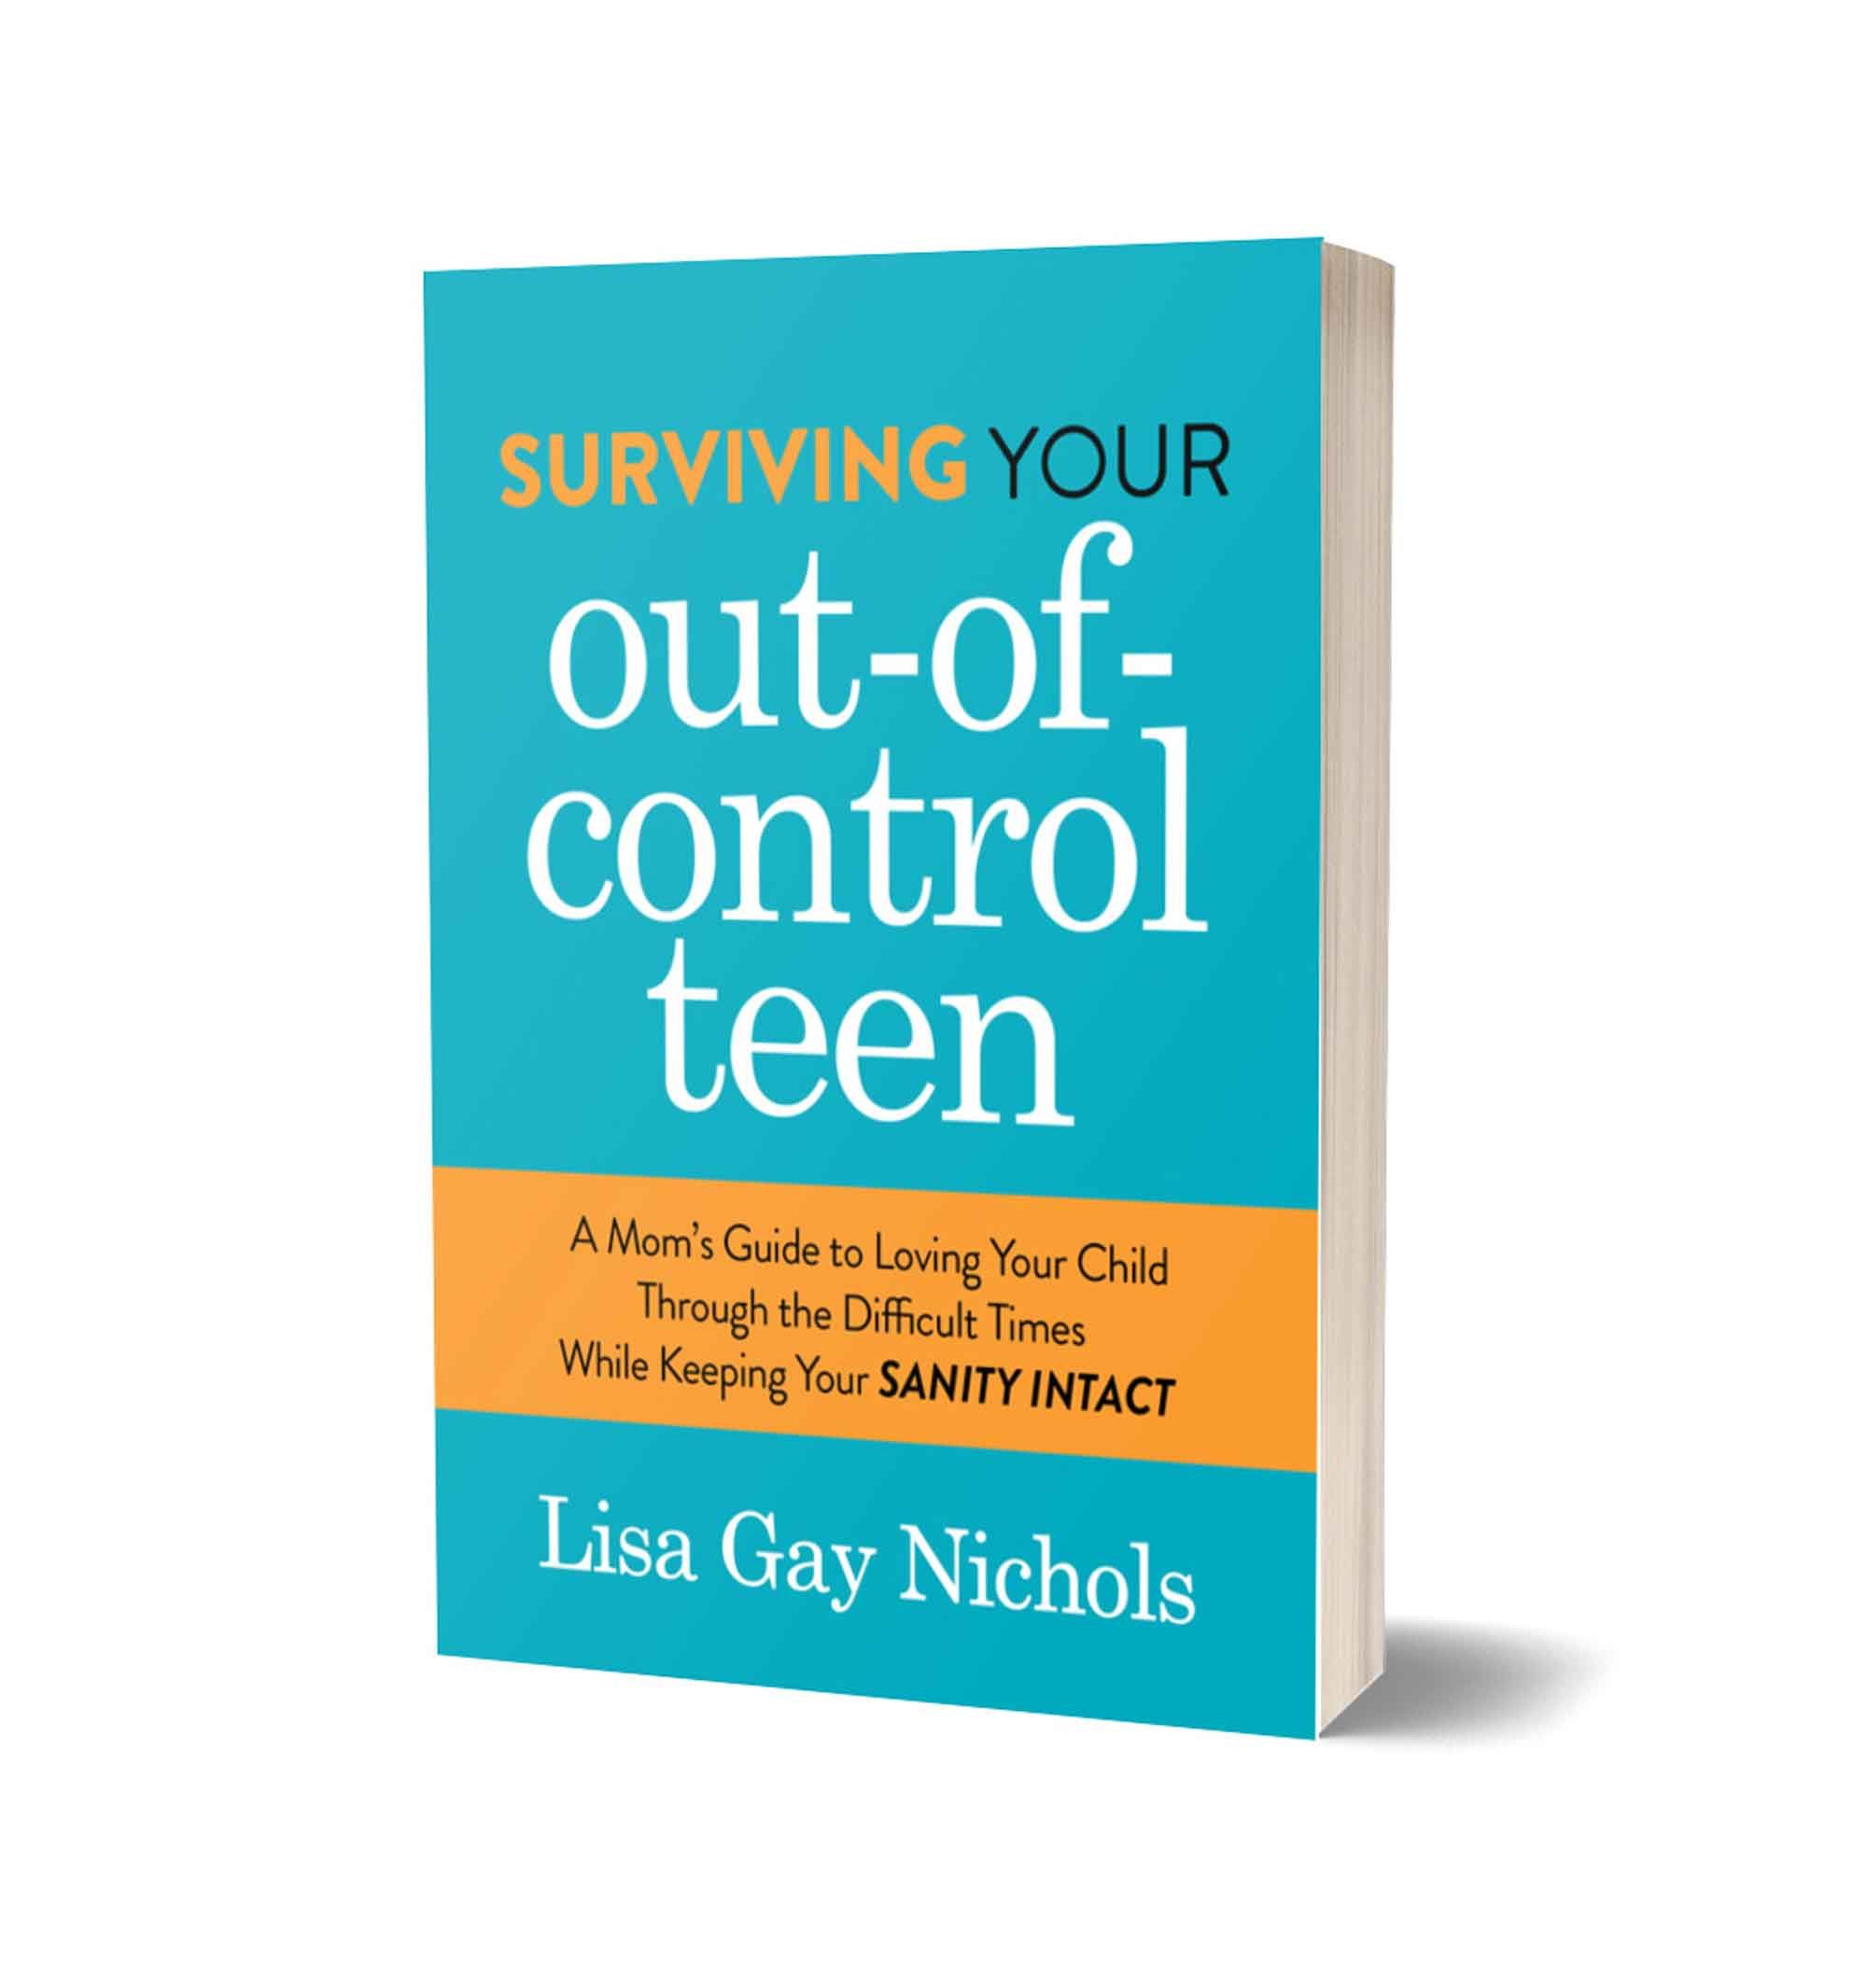 Surviving Your Out-of-Control Teen - A Mom's Guide to Loving Your Child Through the Difficult Times While Keeping Your Sanity Intact